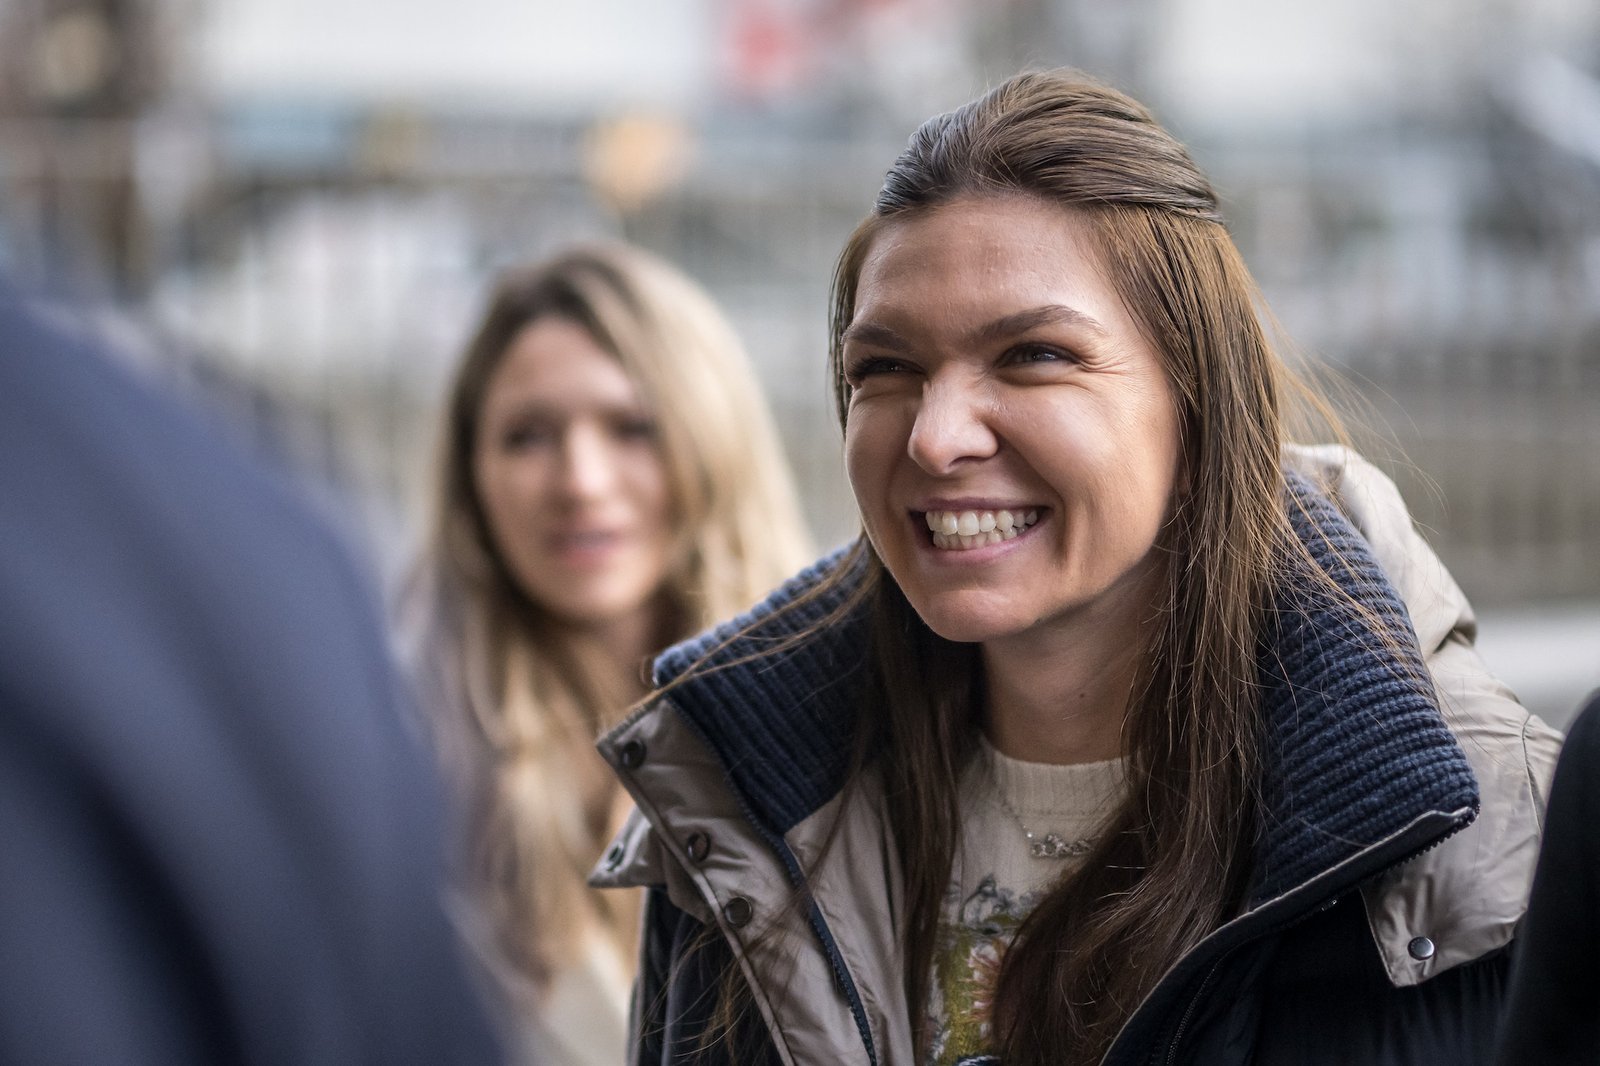 Simona Halep Appealed A Career-Ending Doping Ban And Won